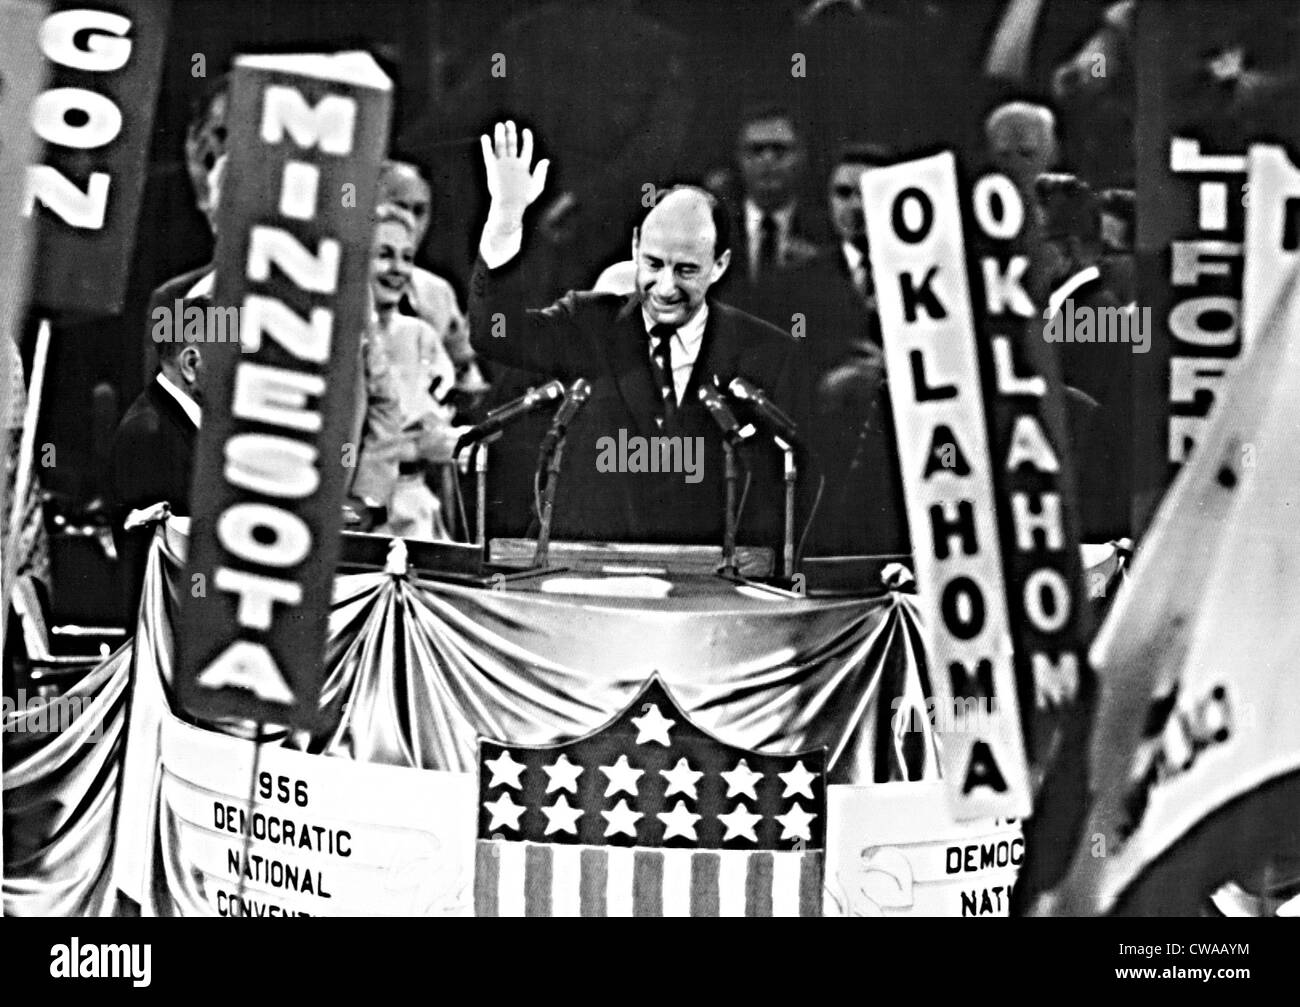 ADLAI STEVENSON, accepts the Democratic nomination to run for President. The delegates nominated him on the first ballot and Stock Photo